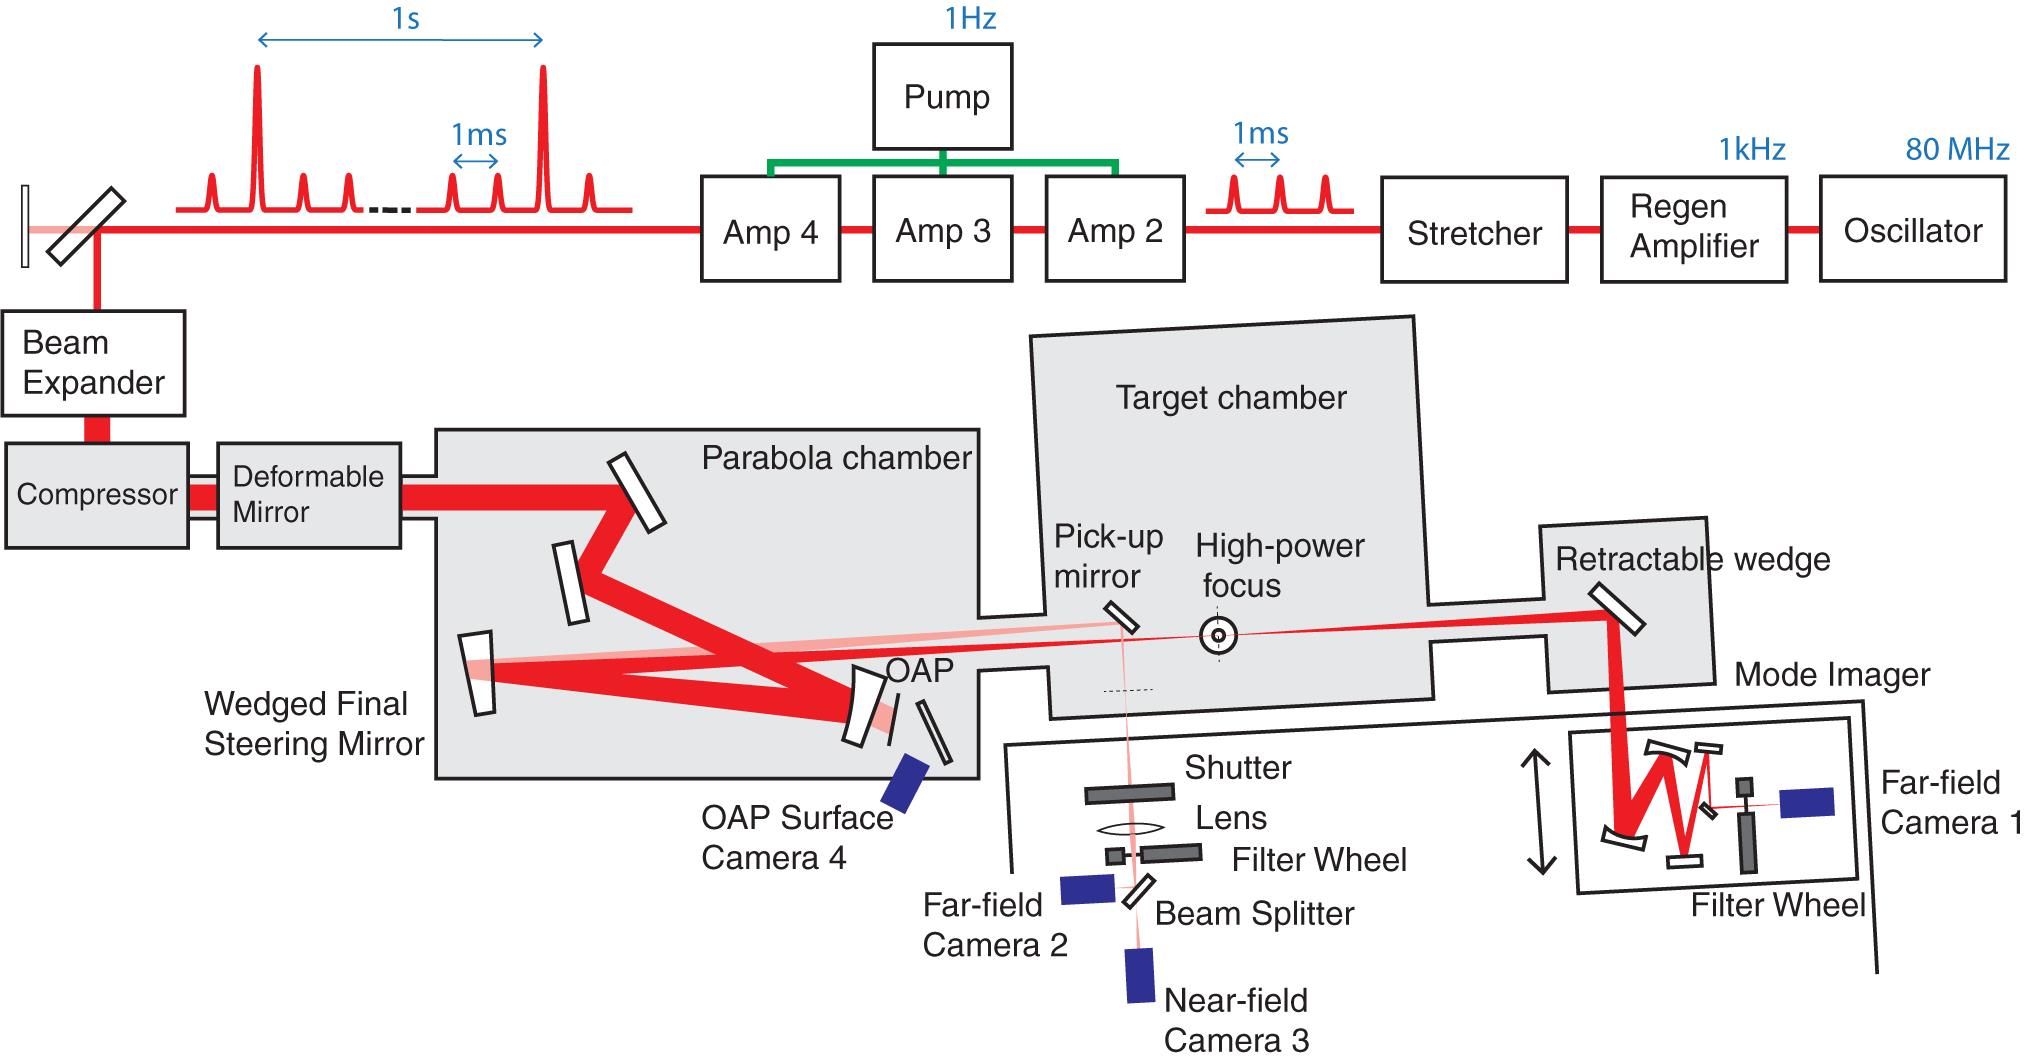 Experimental setup of the 100-TW-class laser system. A 1 kHz, 800 nm, 35 fs laser pulse train is produced in the regenerative amplifier (Regen) and stretched to 300 ps, and then every one in a thousand pulses is amplified in three successive multi-pass bow-tie amplifiers (Amp 2, 3, and 4). A single commercial pump laser (532 nm, ~16 ns pulse duration) is routed to all three amplifier Ti:sapphire crystals with 1 Hz repetition rate. The laser pulses are then compressed to 35 fs and focused into the target chamber, where a gas jet is placed for LPA experiments. The laser mode at focus is measured with two diagnostics: (1) a common mode imager (after insertion of the retractable wedge) with camera 1 recording the far-field laser profile by imaging the target chamber focus plane; and (2) a correlated witness beam setup, where a back-surface-reflected final steering mirror is routing a correlated copy of the main beam to a setup measuring the laser’s far-field (camera 2, imaging the target chamber focus plane) and quasi-near-field (camera 3, imaging a plane 44 mm downstream of the target chamber focus). The near-field beam profile at the off-axis parabolic mirror (OAP) surface is recorded by camera 4. Gray boxes represent vacuum chambers.